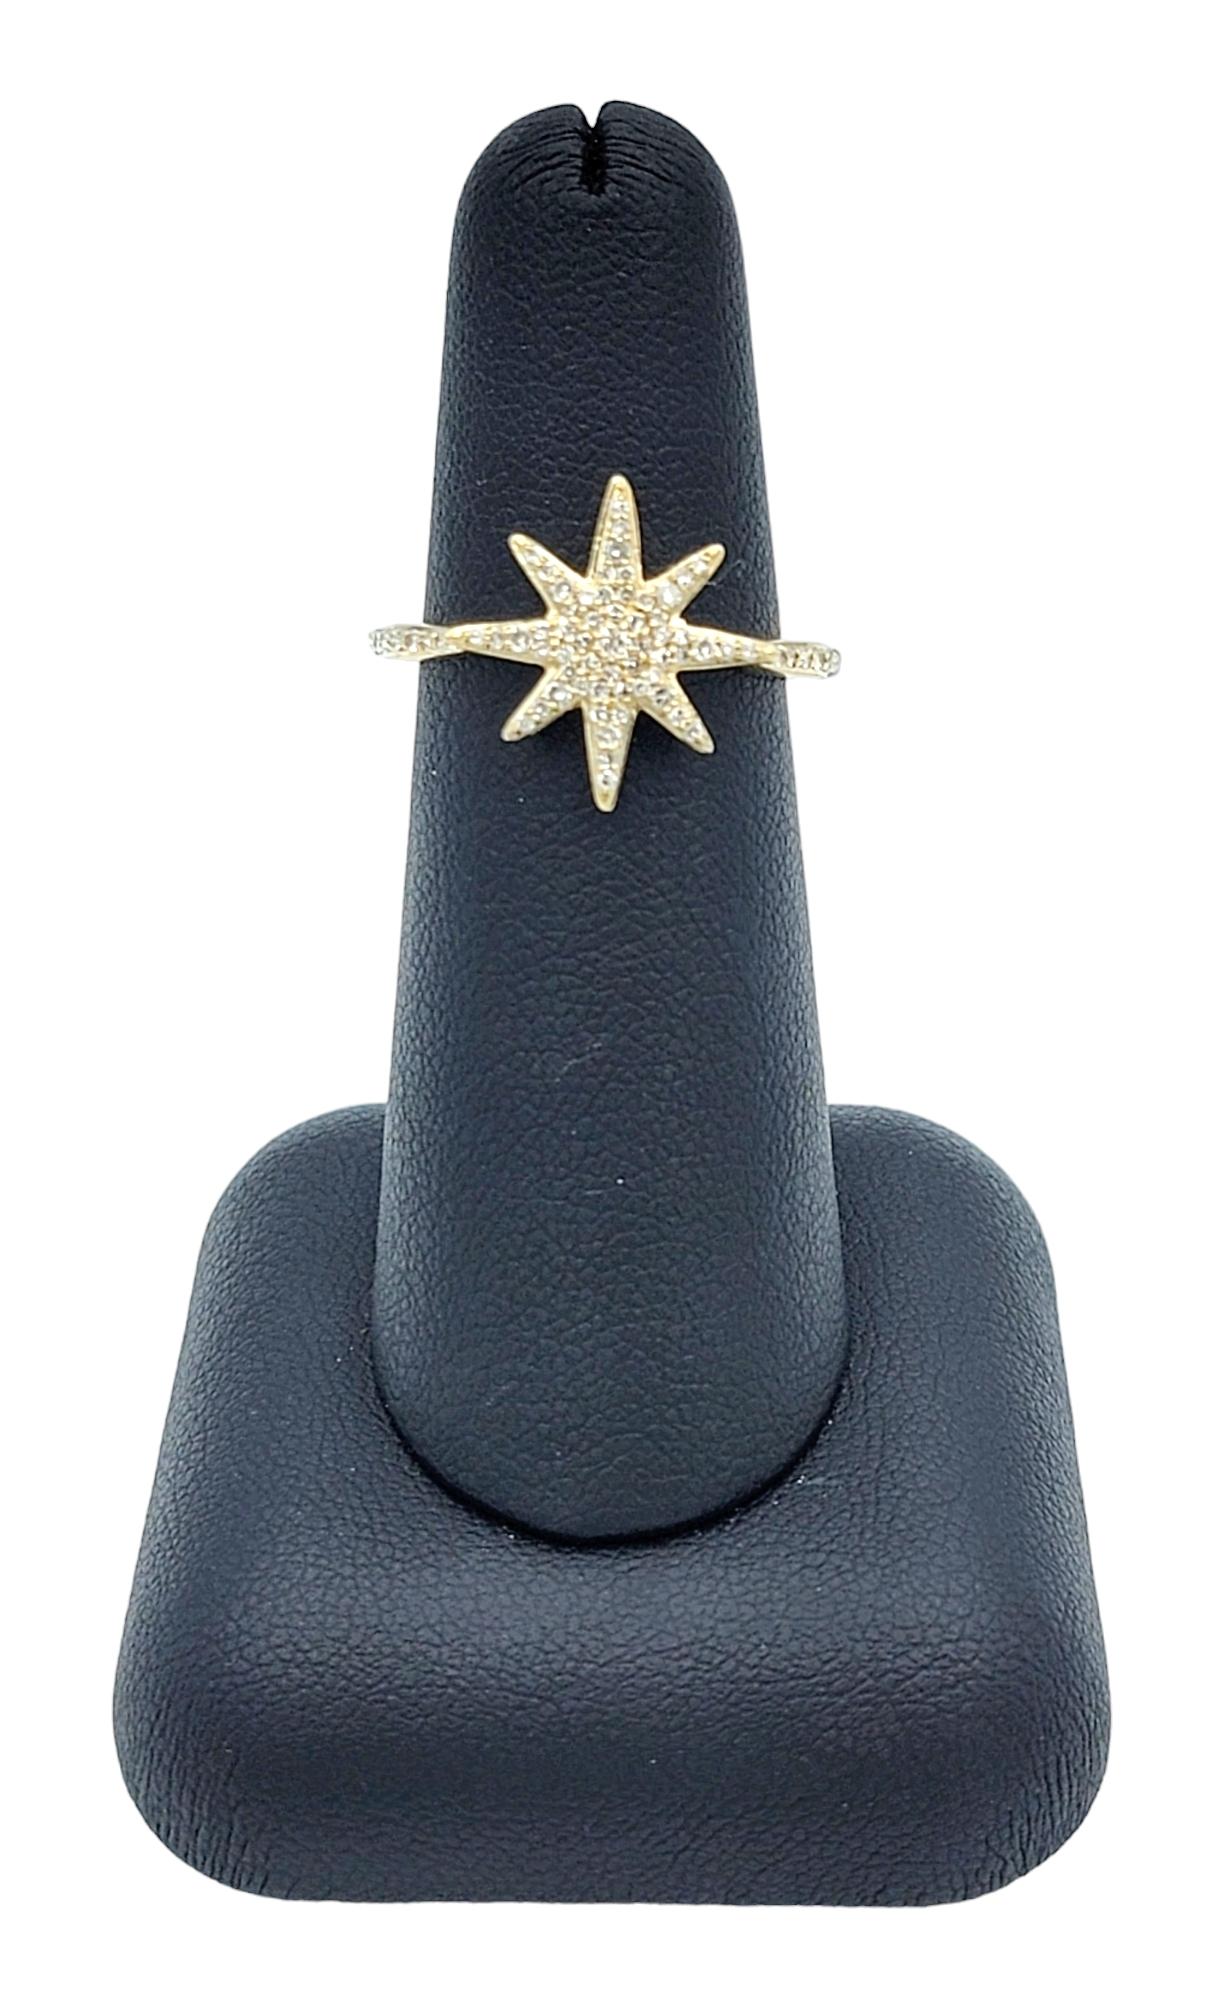 Pavé Diamond 8-Point Star Motif Band Ring in Polished 14 Karat Yellow Gold In Good Condition For Sale In Scottsdale, AZ